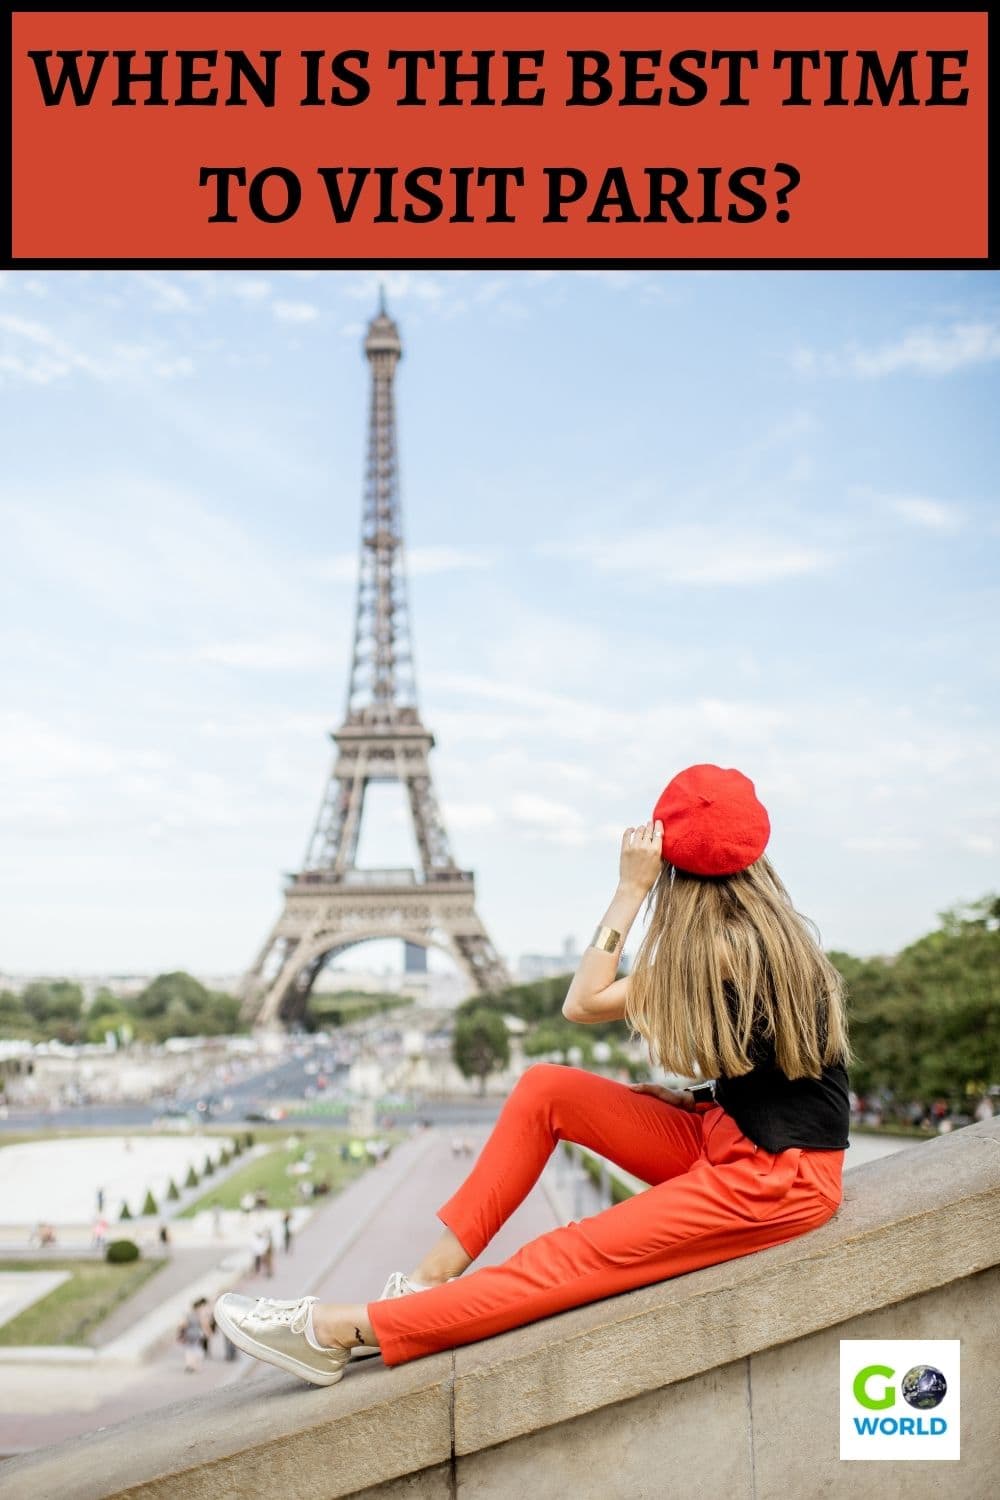 A comprehensive guide walks you through what to expect in each month of the year, allowing you to choose the best time to visit Paris for you. #paris #whentovisitparis